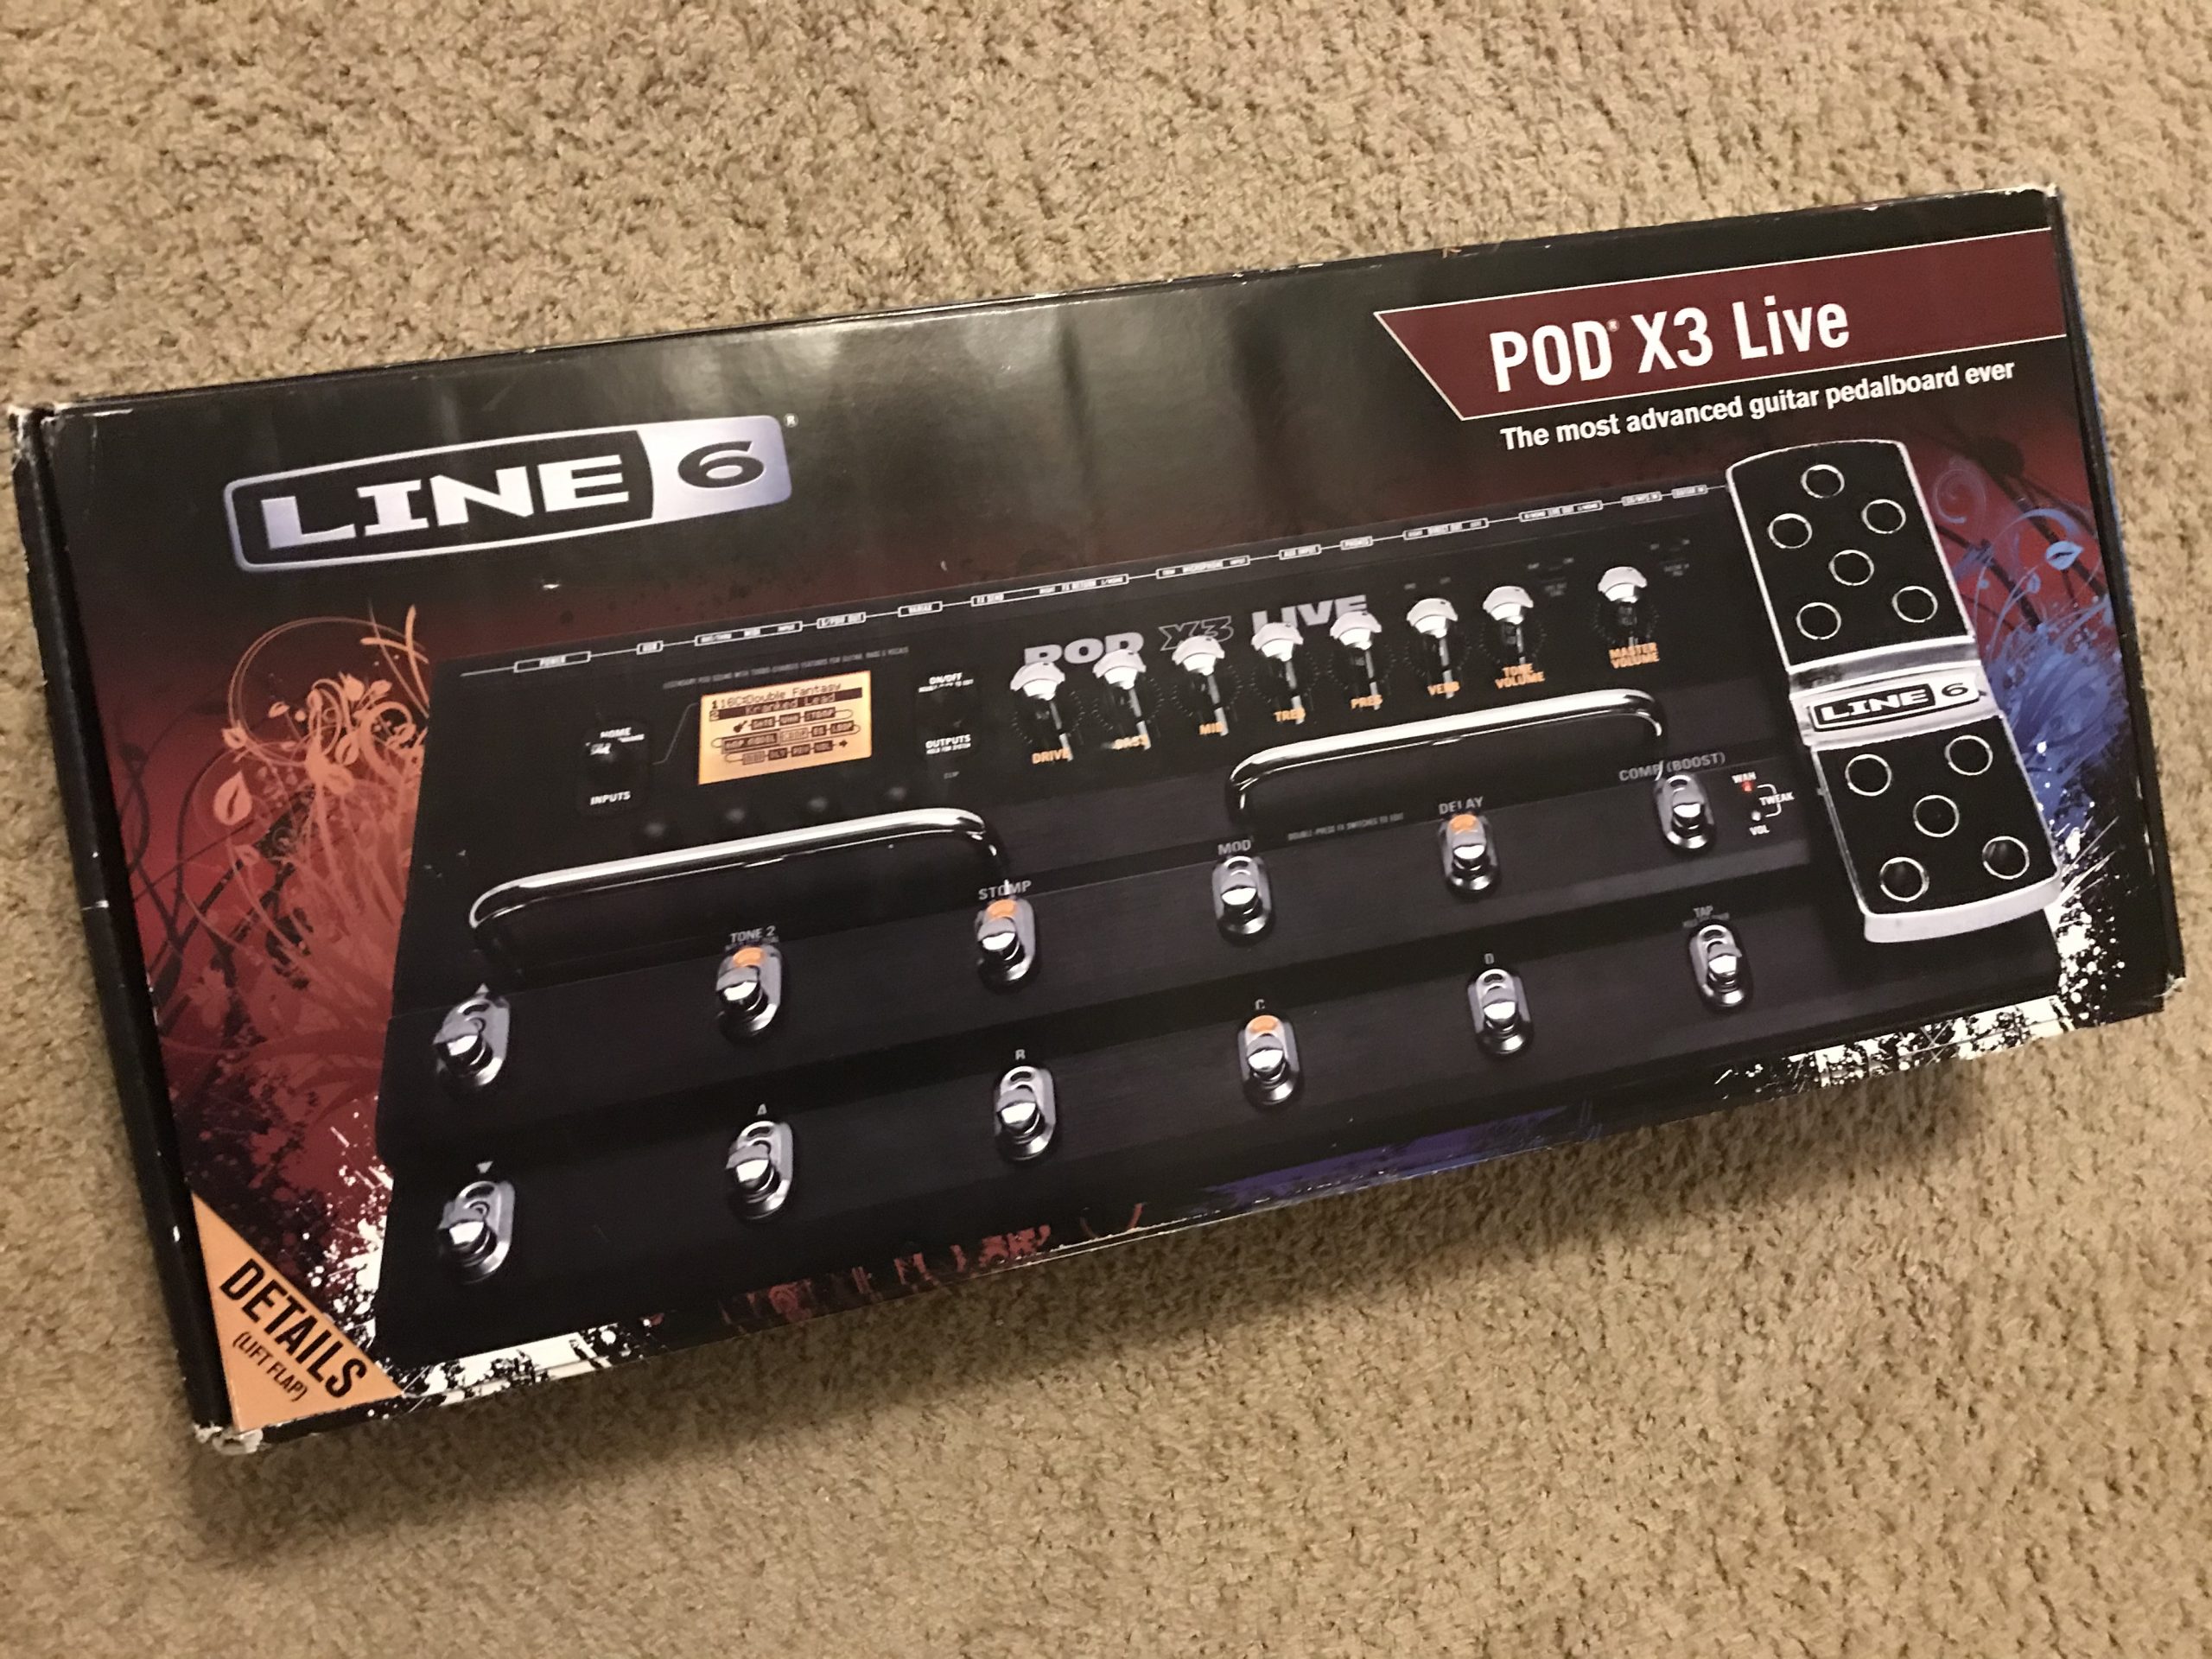 Line 6 POD X3 Live Guitar Multi-Effects Pedal in mint condition